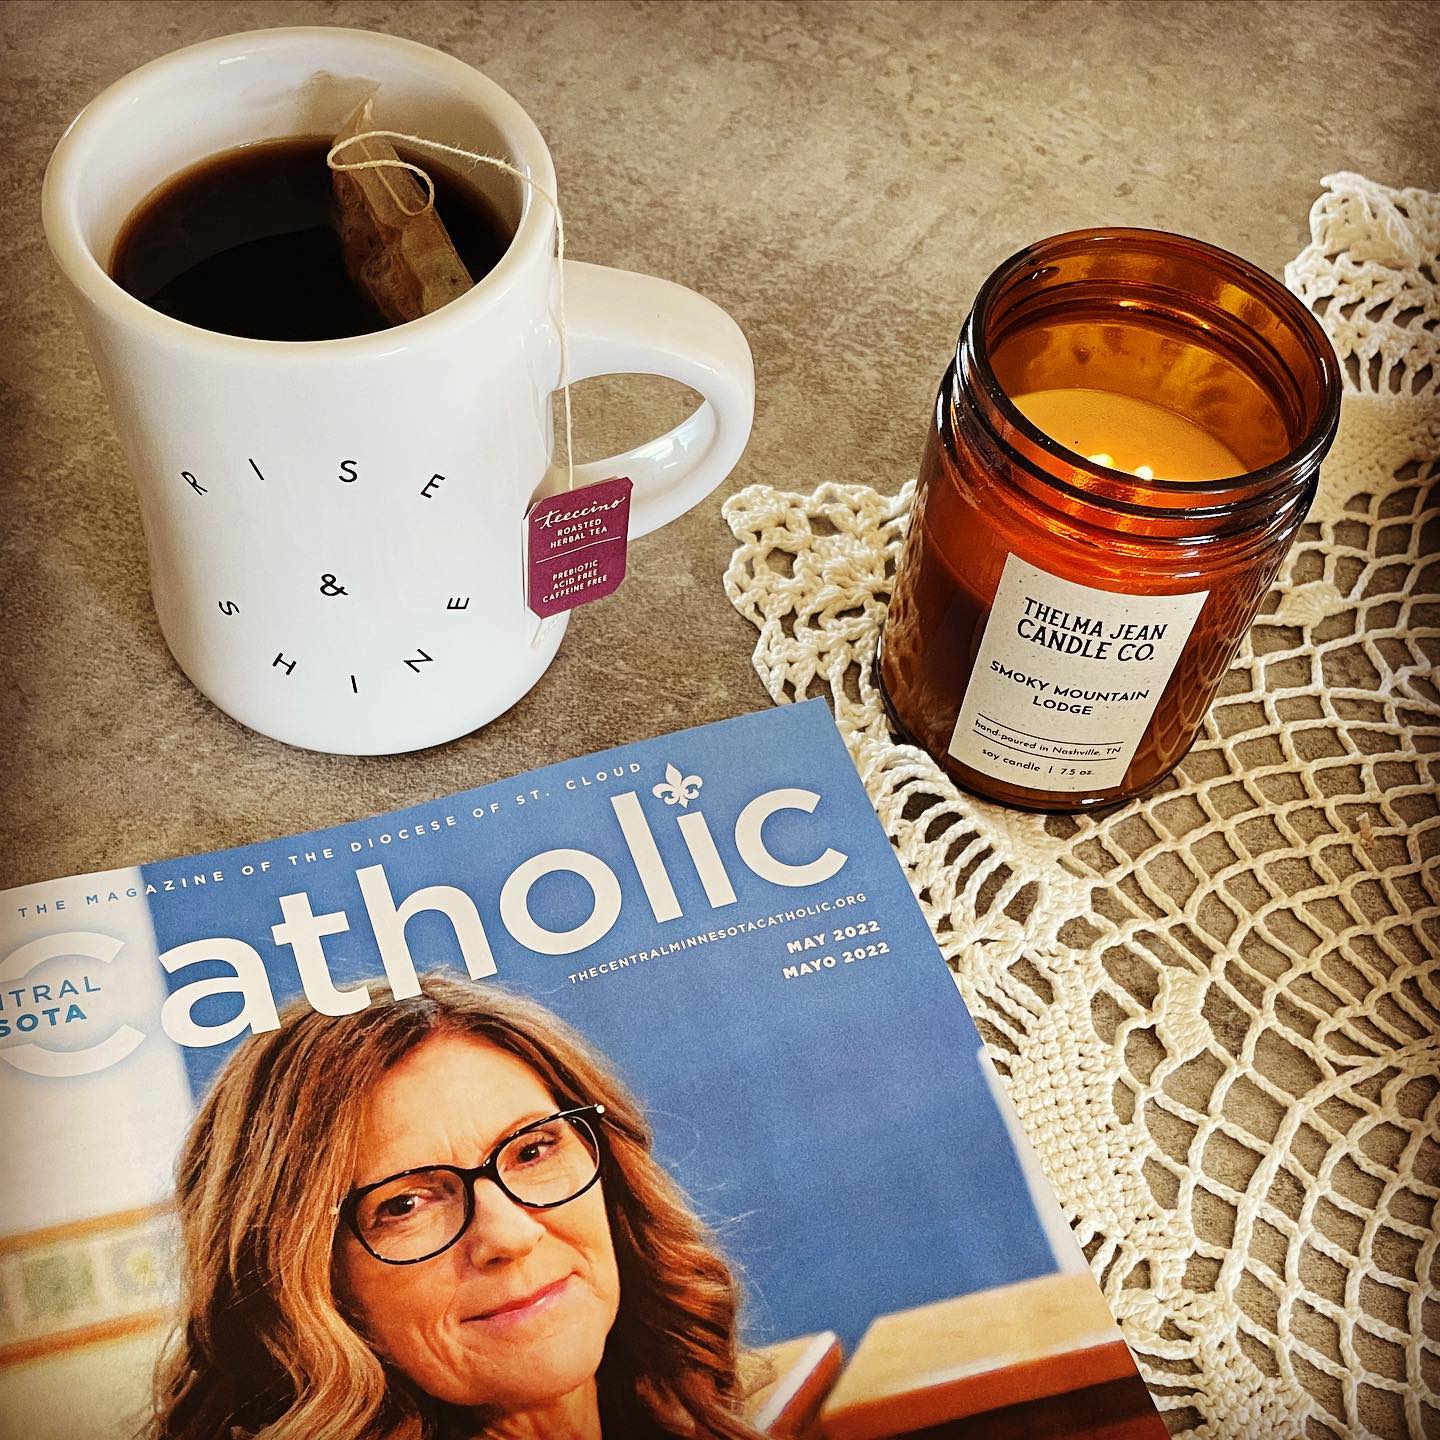 The May issue of the Central Minnesota Catholic is out now! Sit back, relax and read our cover story about Kim Flannigan and be inspired by her love of the Eucharist. Also read about the Eucharistic Revival and much more!
#eucharist #eucharisticrevival #catholic #catholicmedia #faithmagazine #catholicsofinstagram